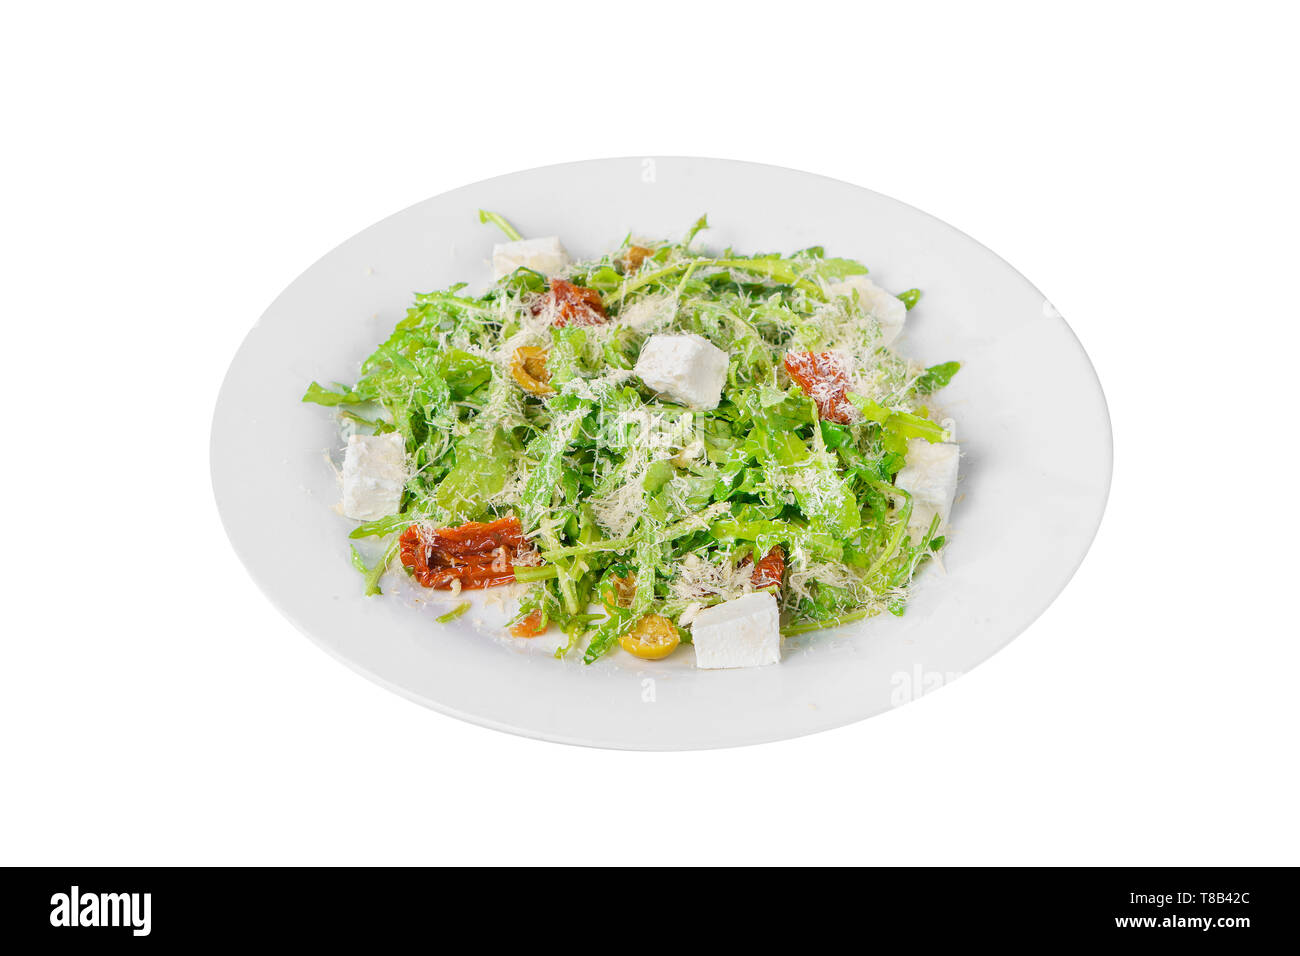 Salad with with arugula, feta, dried tomatoes, olives and grated cheese on plate, white isolated background, side view Stock Photo